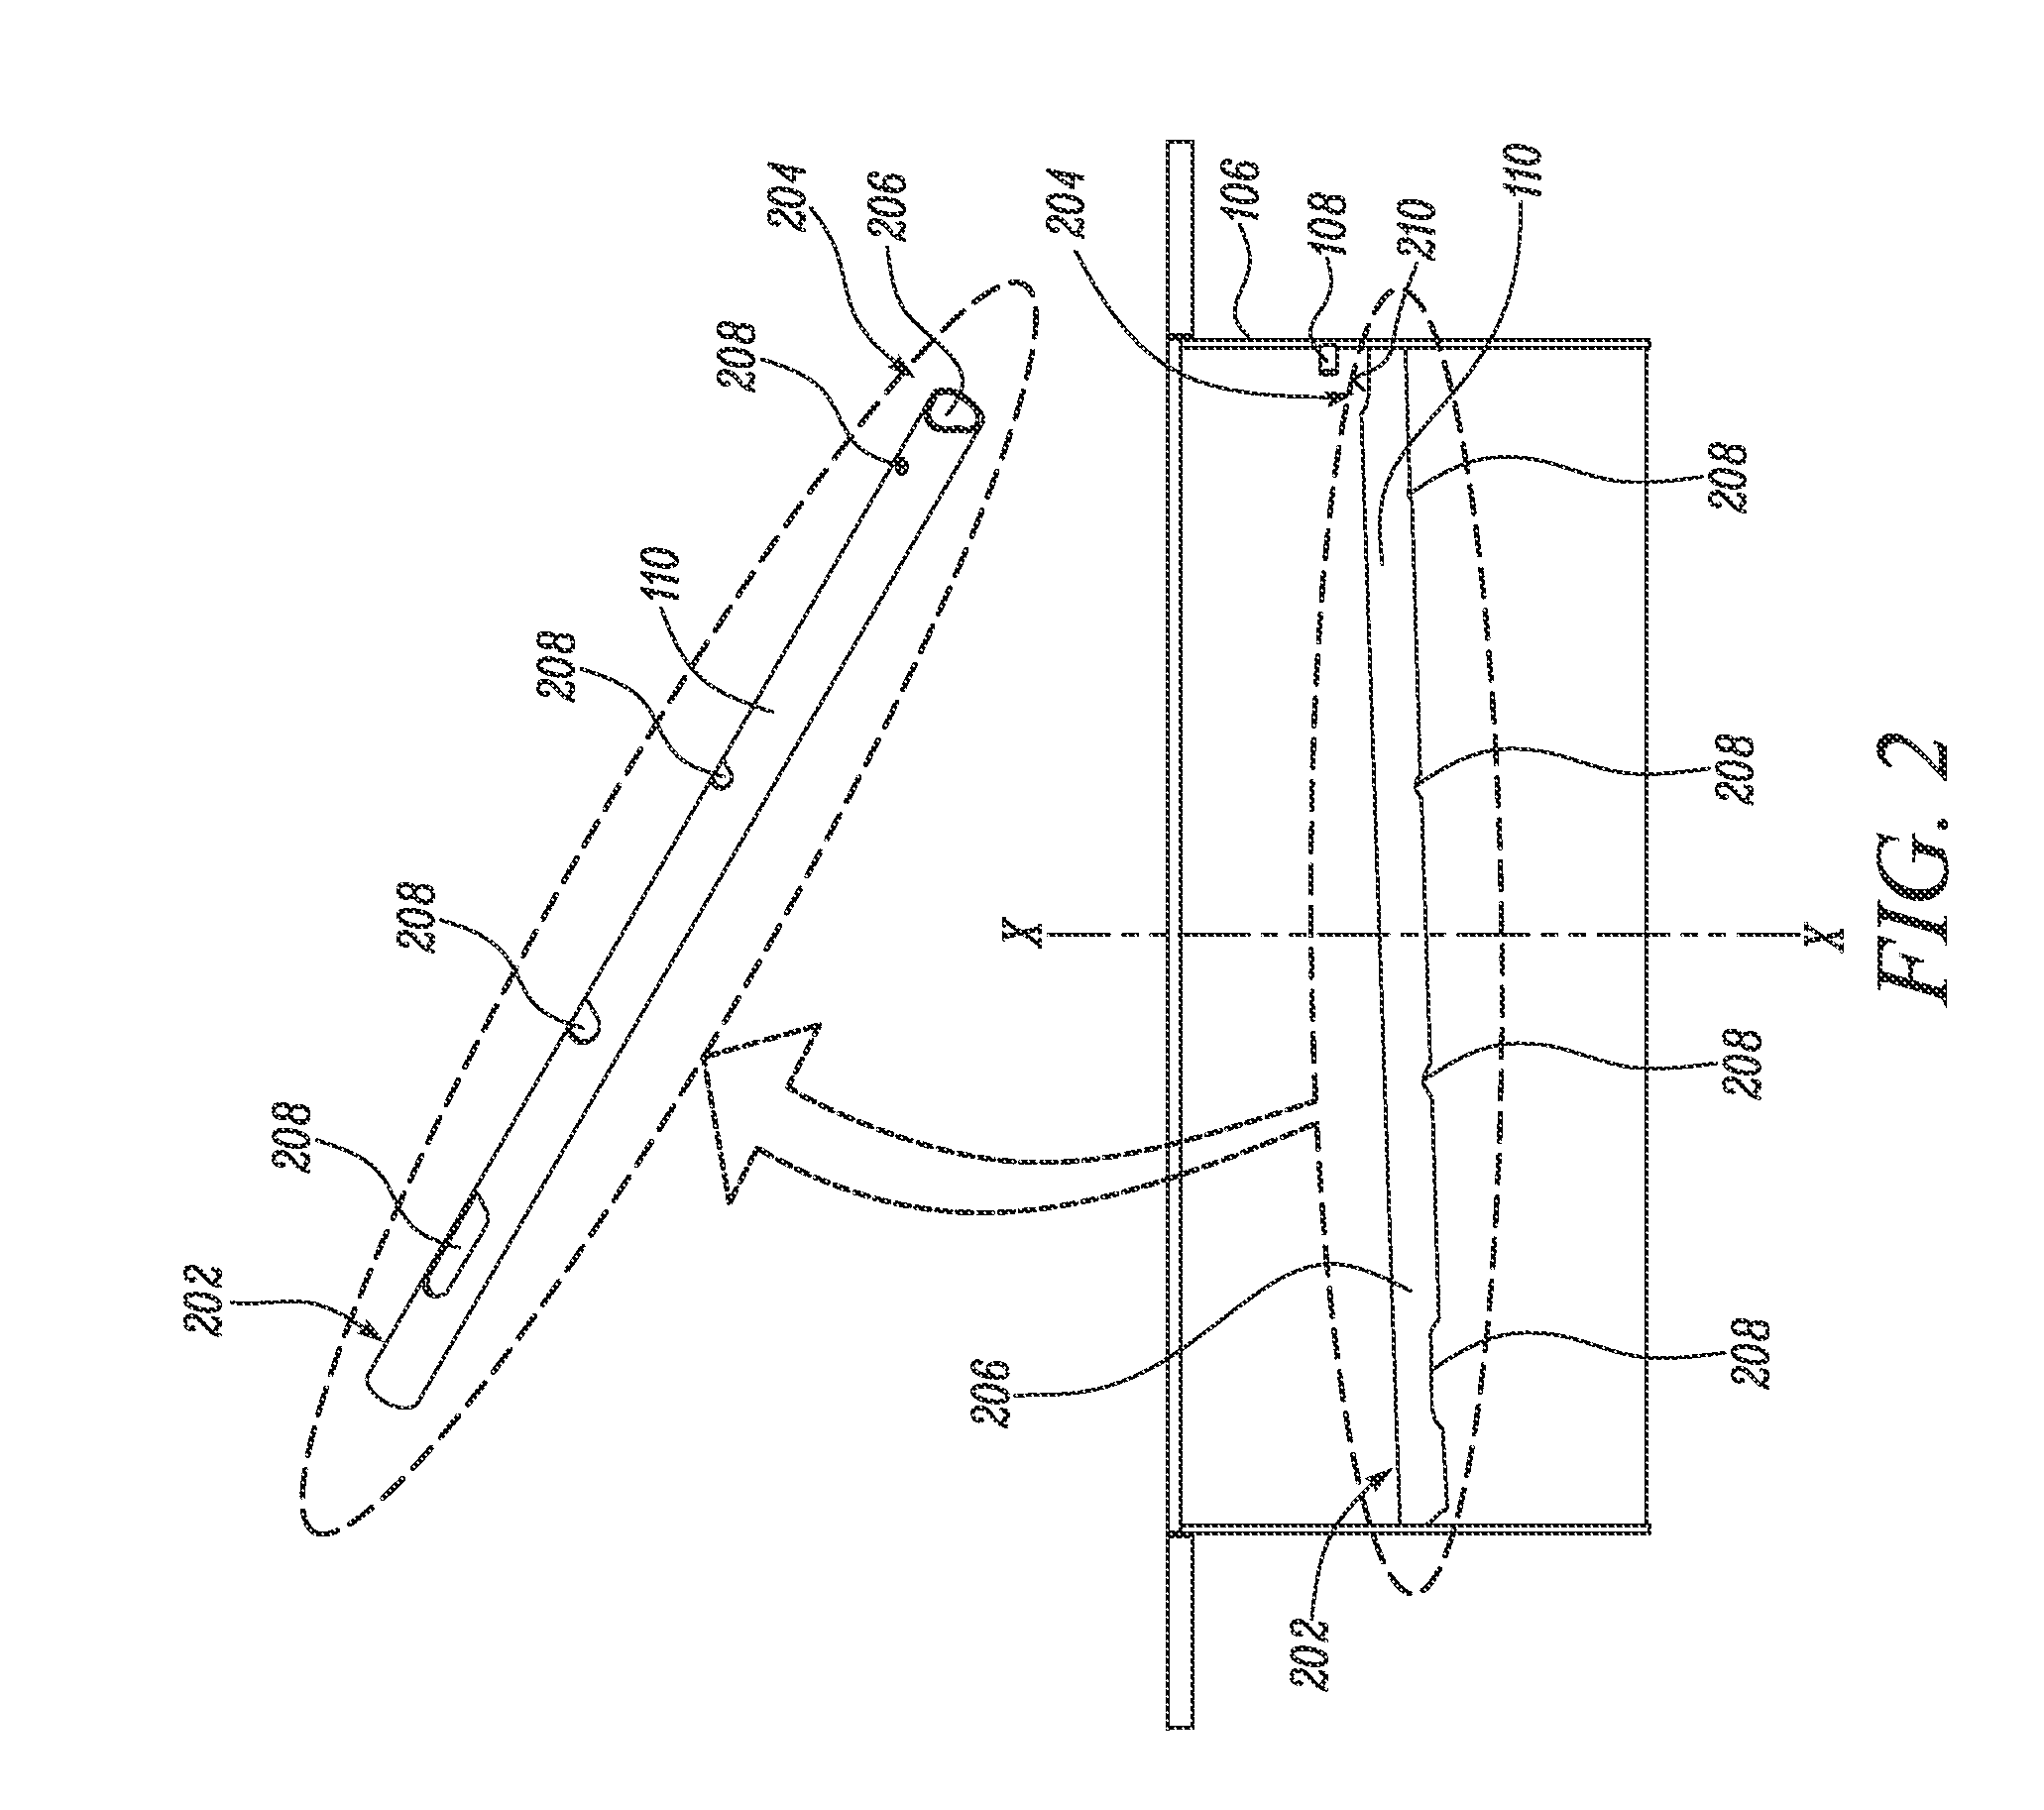 System and method for sampling of fluid